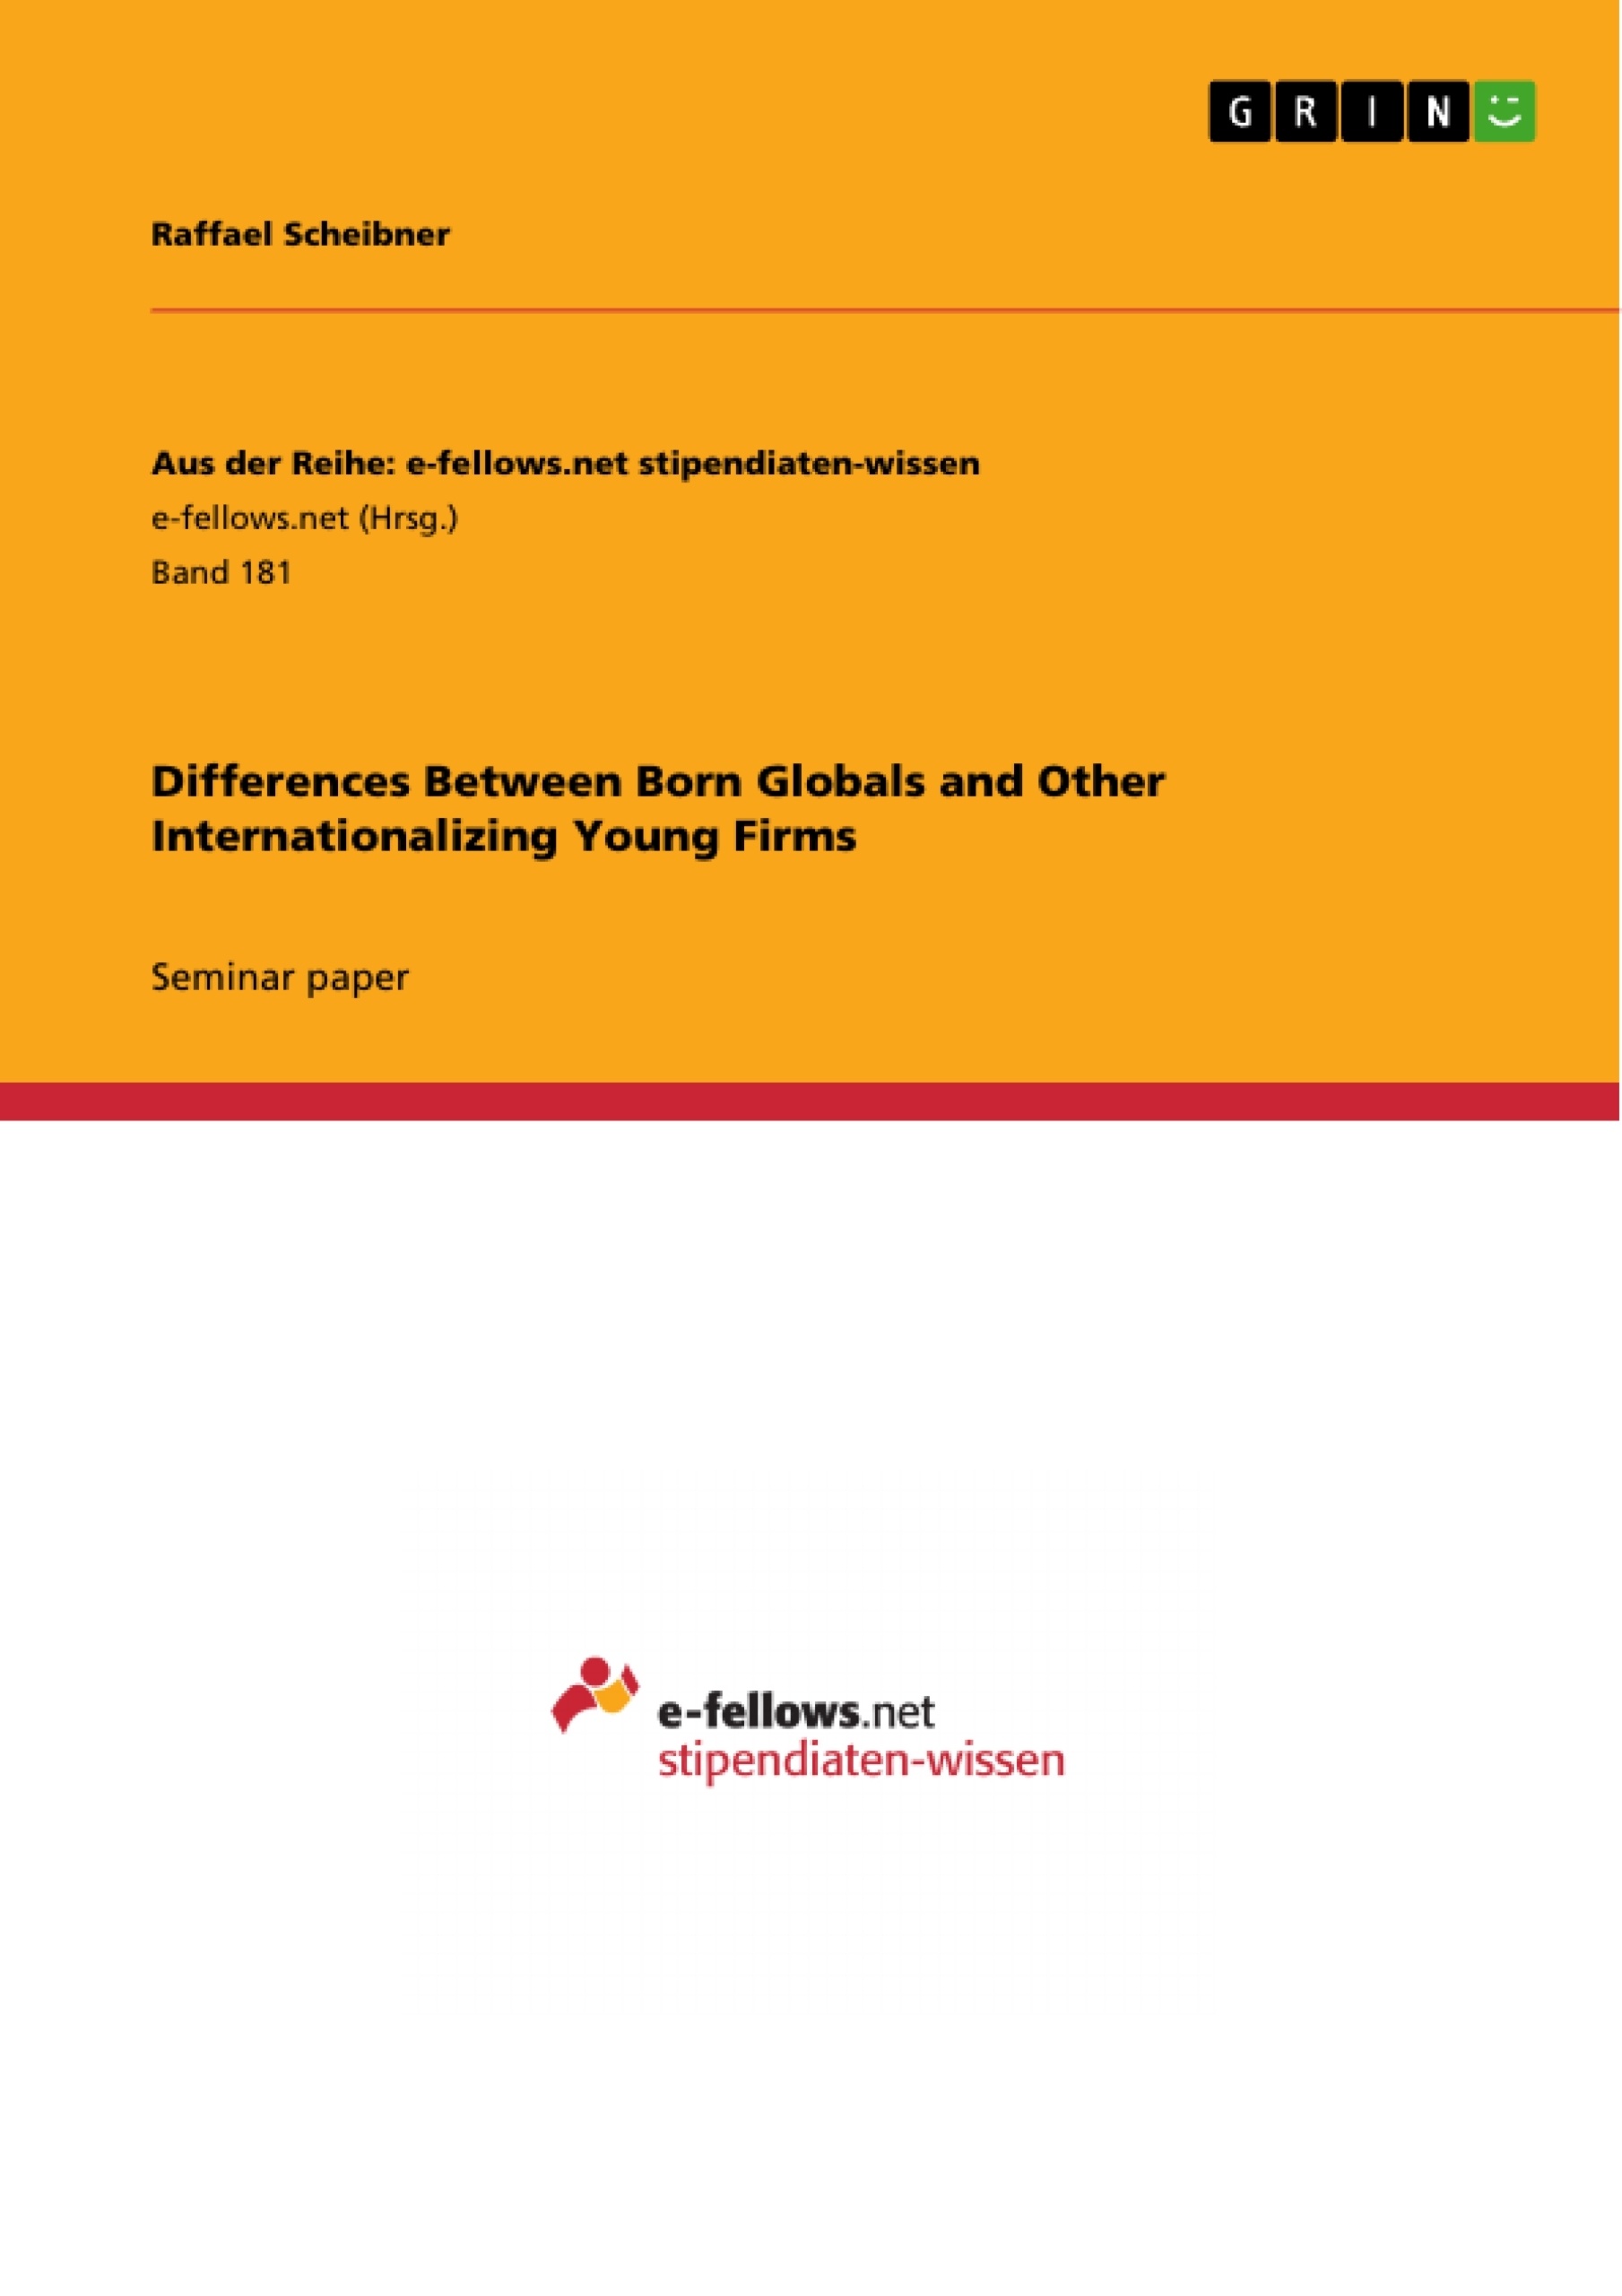 Título: Differences Between Born Globals and Other Internationalizing Young Firms